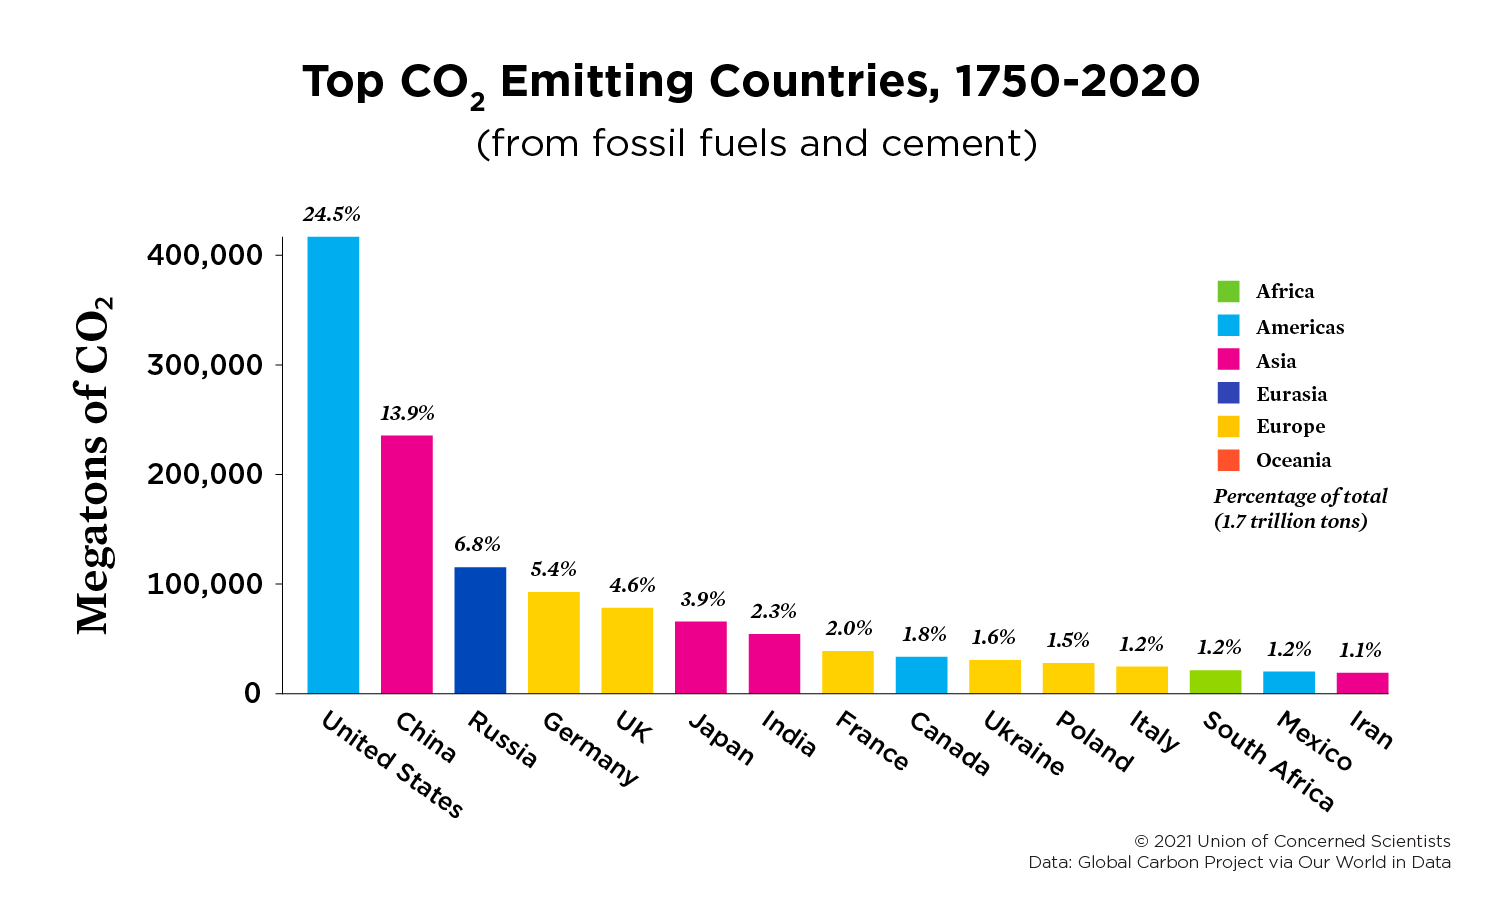 A chart showing the top CO2 emitting countries from 1750-2020, with emissions that came from fossil fuels and cement. 